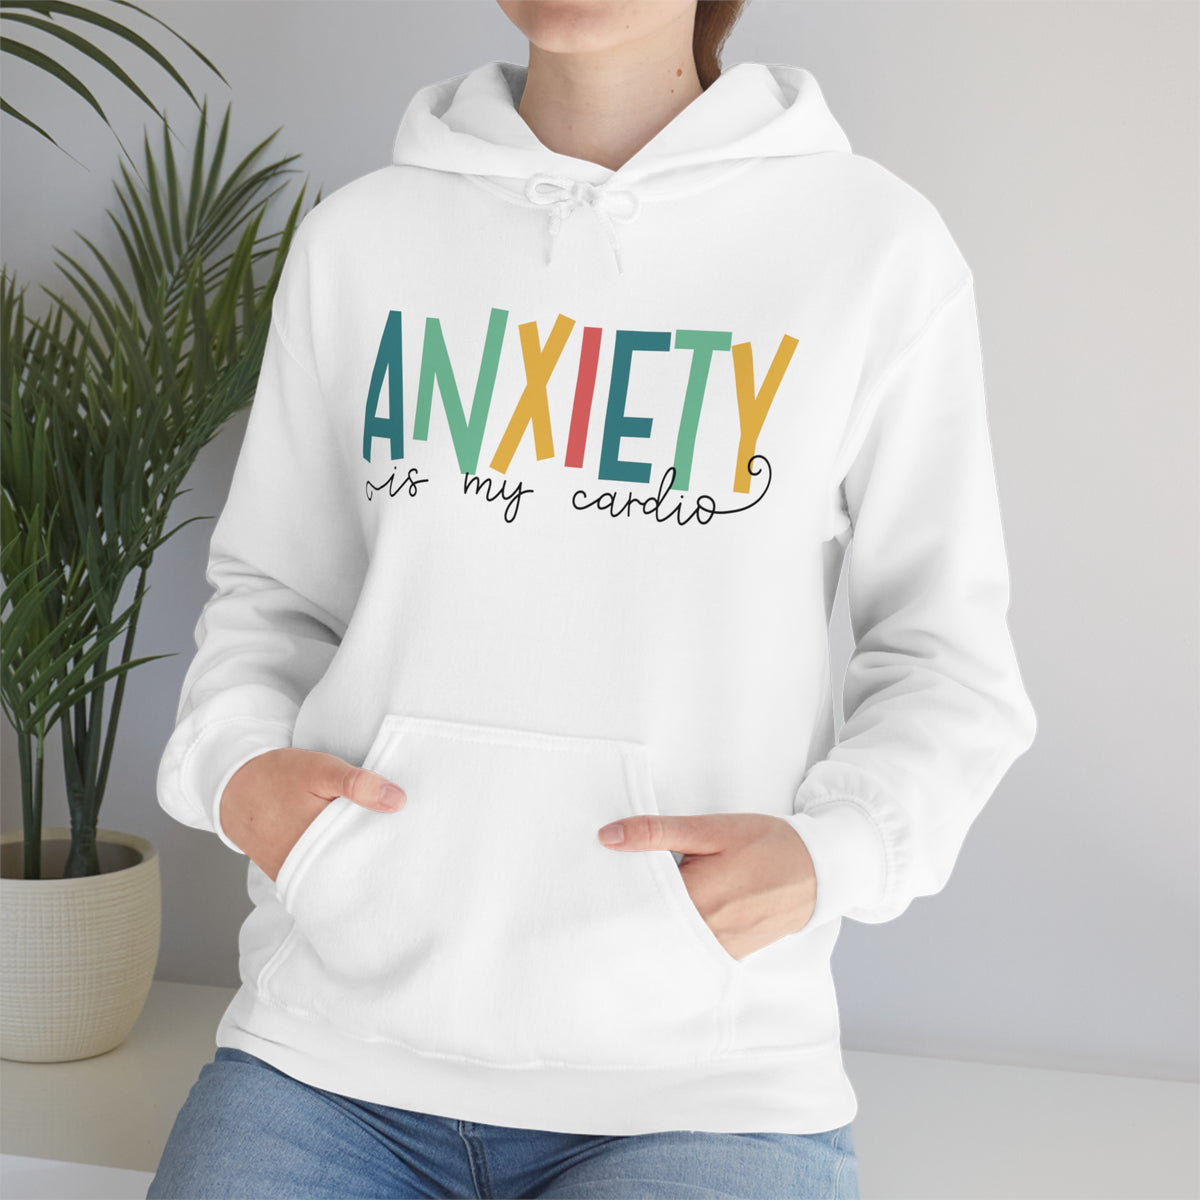 Anxiety Is My Cardio Anxiety Sweatshirt | Funny Mental Health Shirt | Counselor Shirt | Gift For Her | Unisex Hooded Sweatshirt